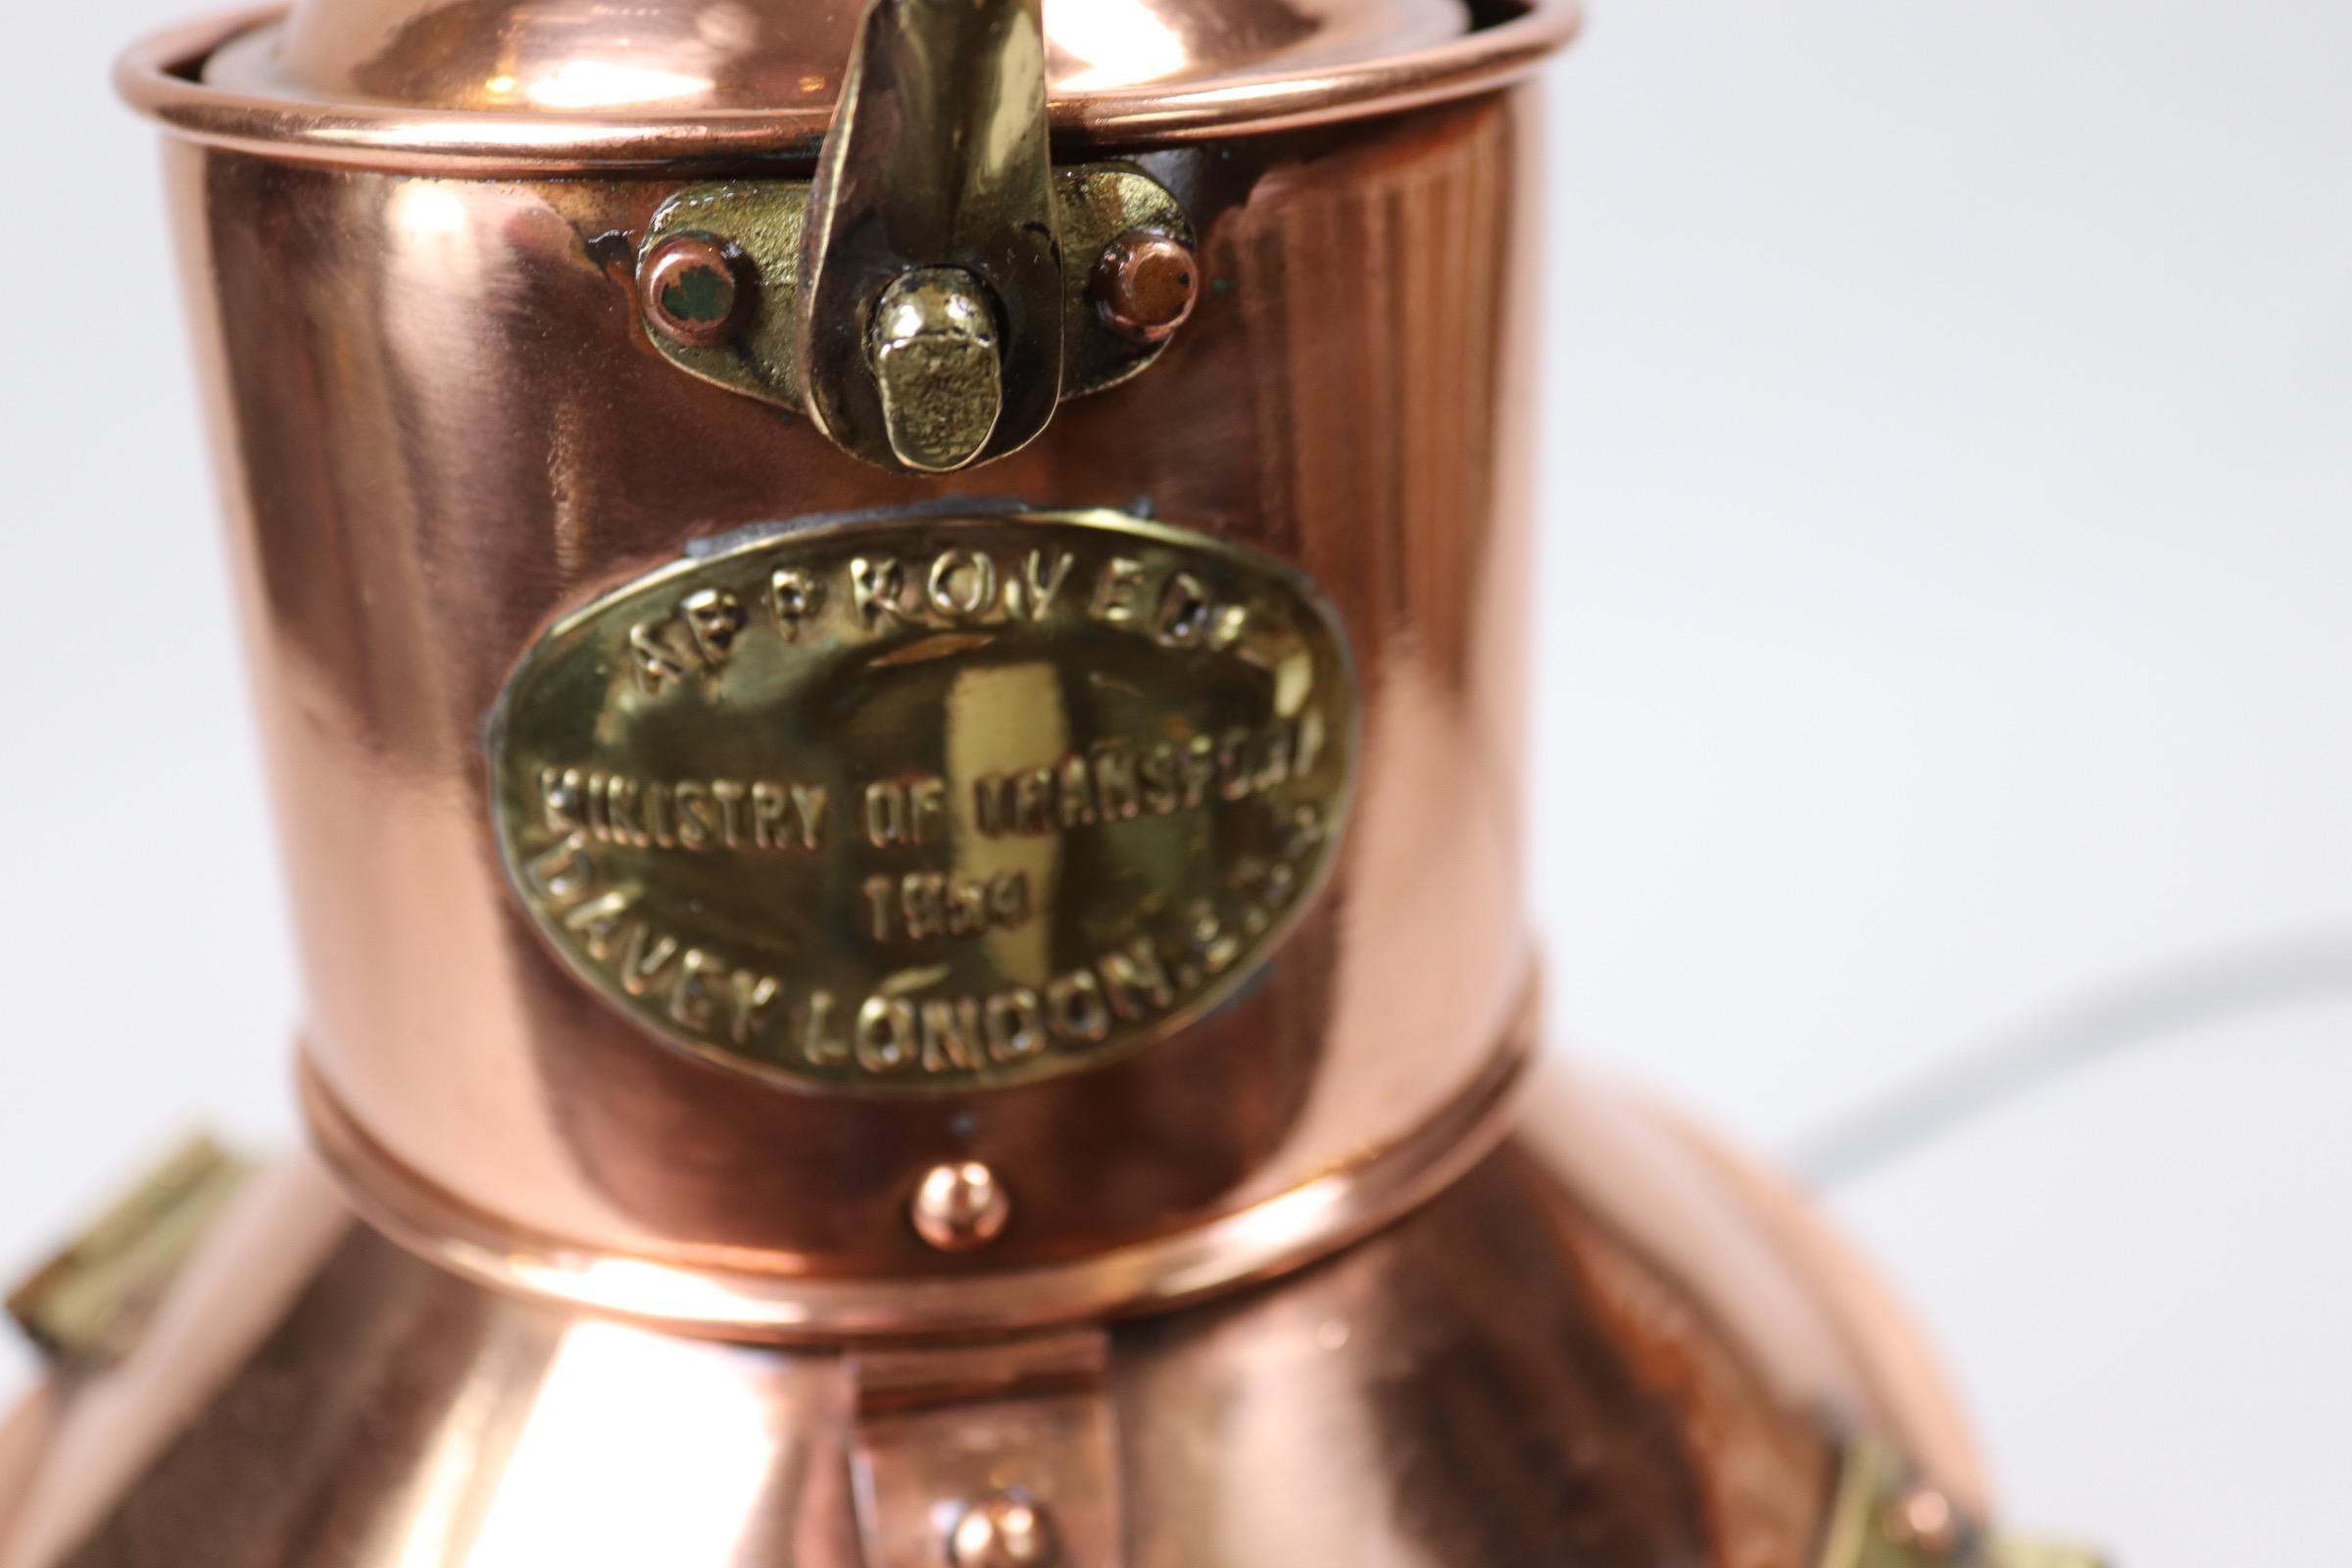 Solid copper highly polished and lacquered ships signal lantern with brass makers badge from Davey of London, Ministry of Transport, 1954, with thumb operated shutter mechanism, hinged top, carry handle etc.. Electrified for home use. Weight is 12